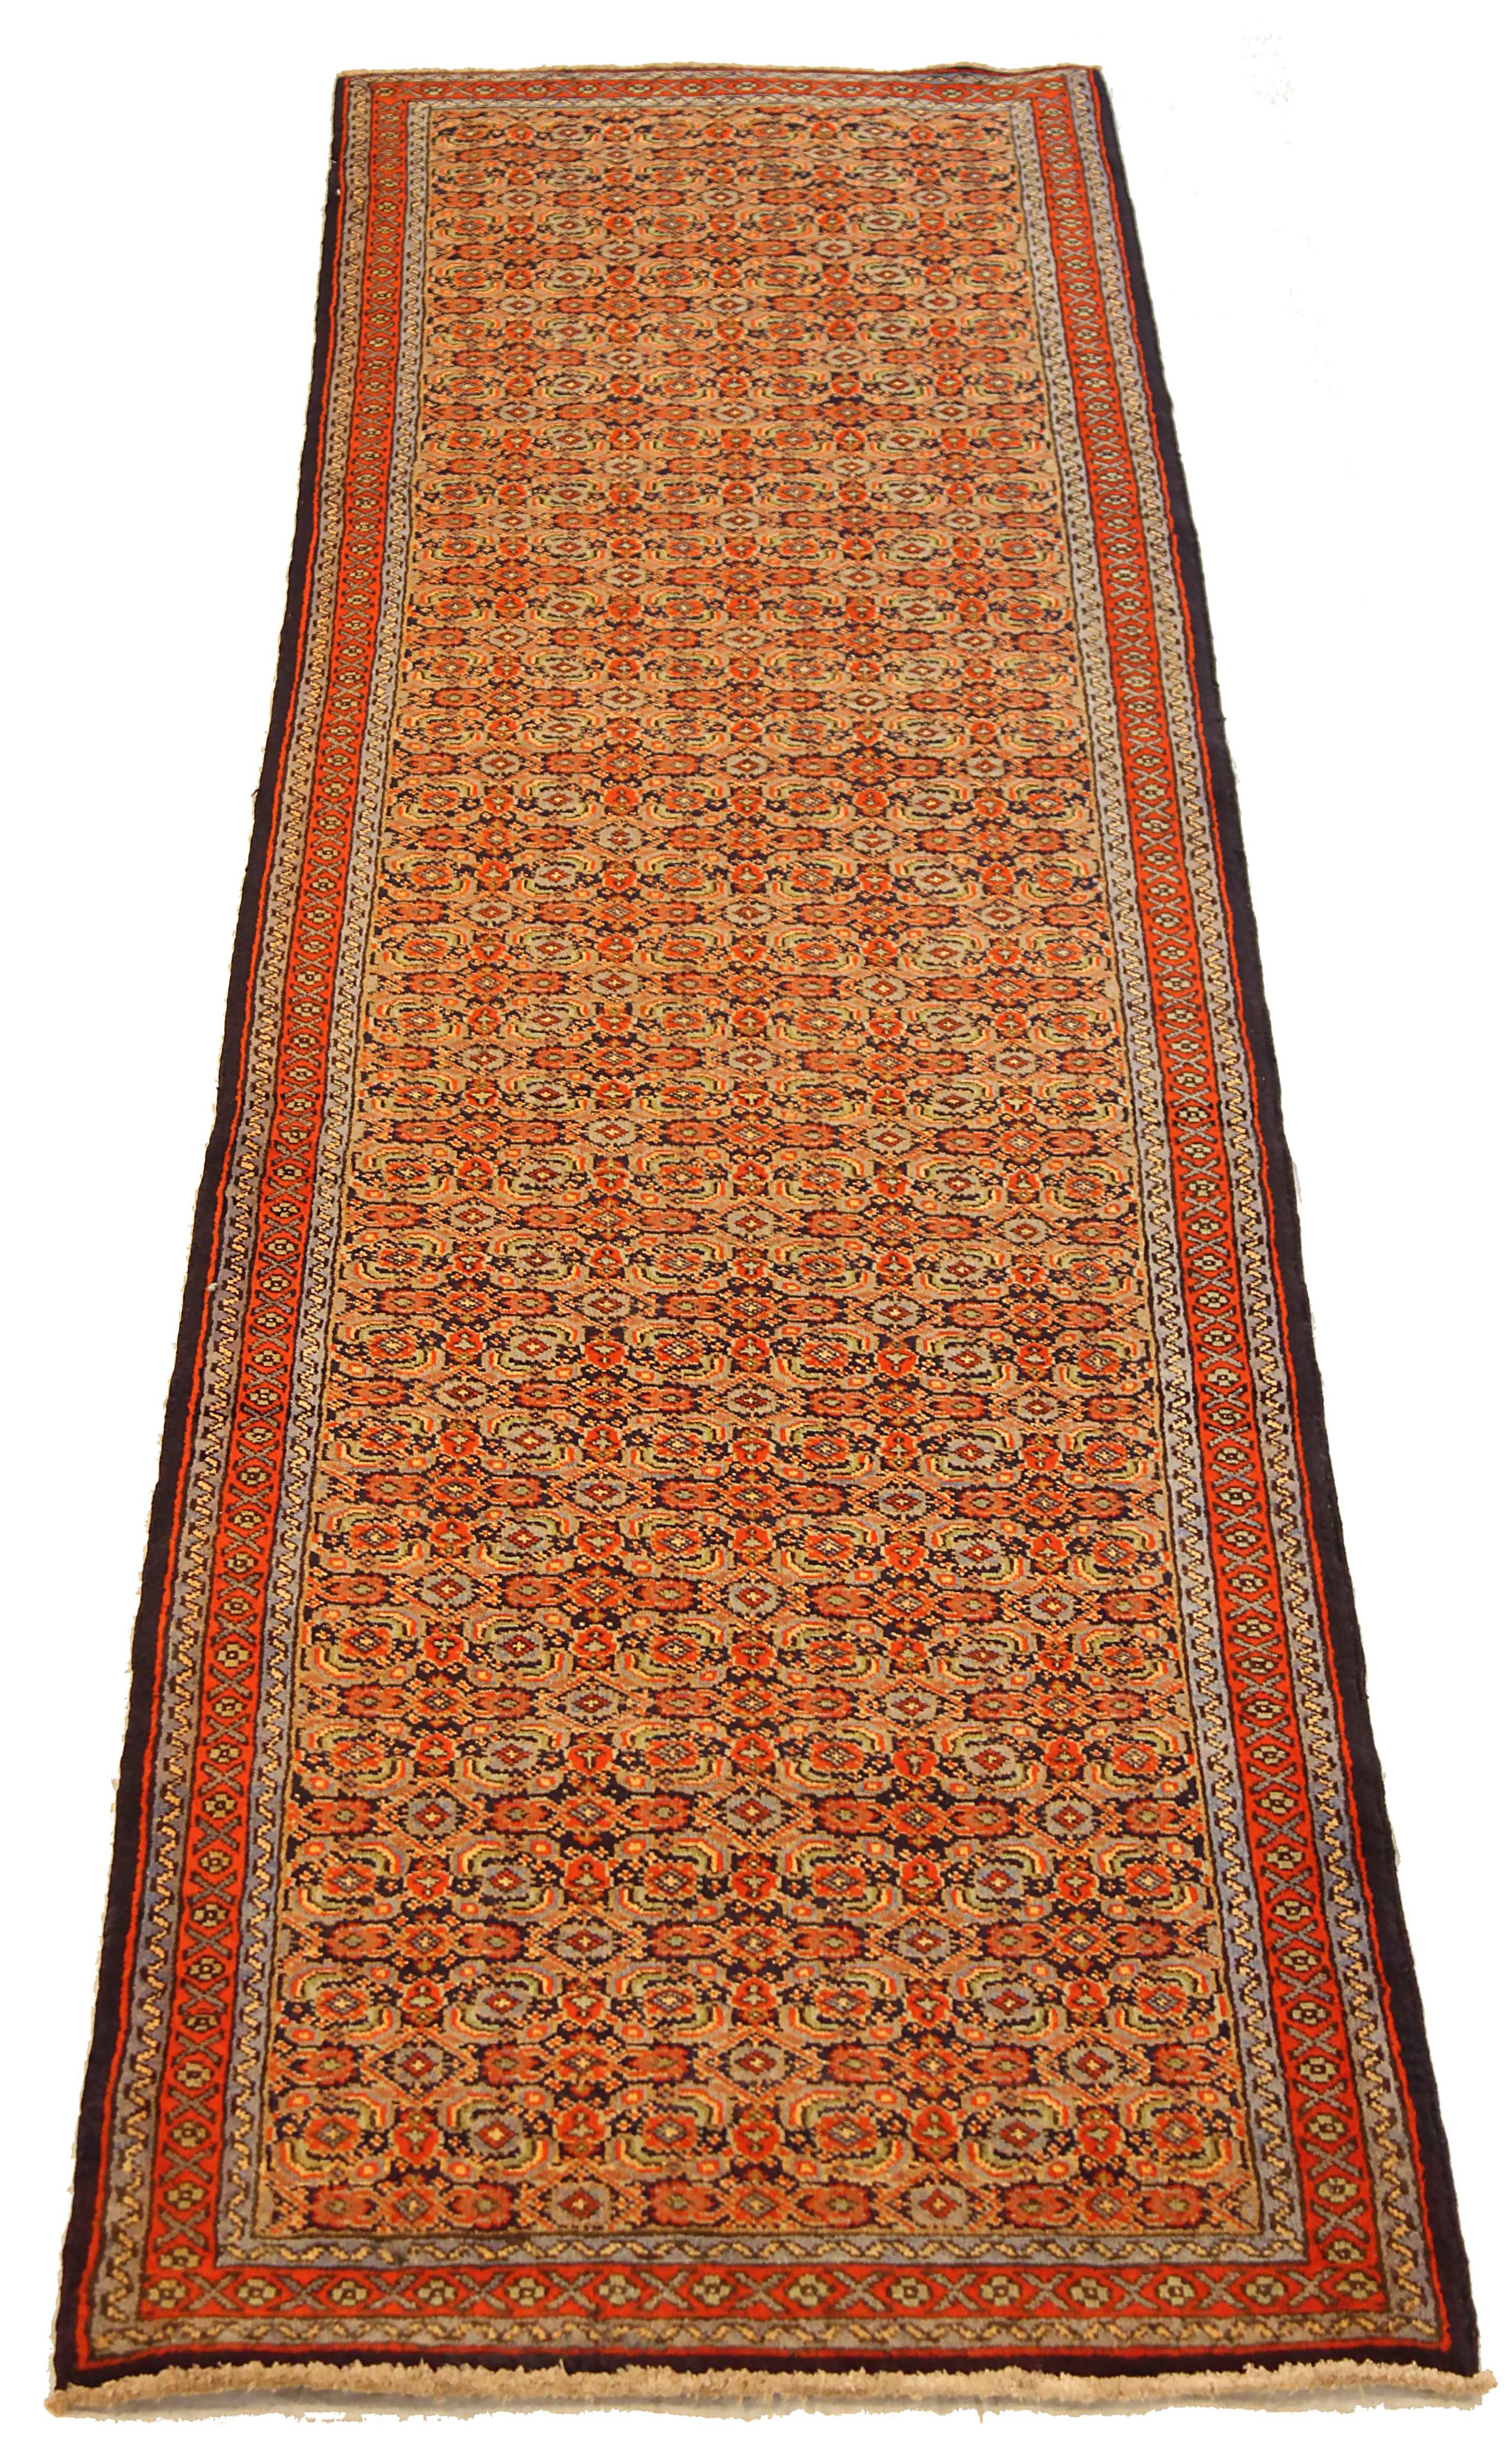 Antique Persian runner rug handwoven from the finest sheep’s wool. It’s colored with all-natural vegetable dyes that are safe for humans and pets. It’s a traditional Ardabil design handwoven by expert artisans. It’s a lovely runner rug that can be